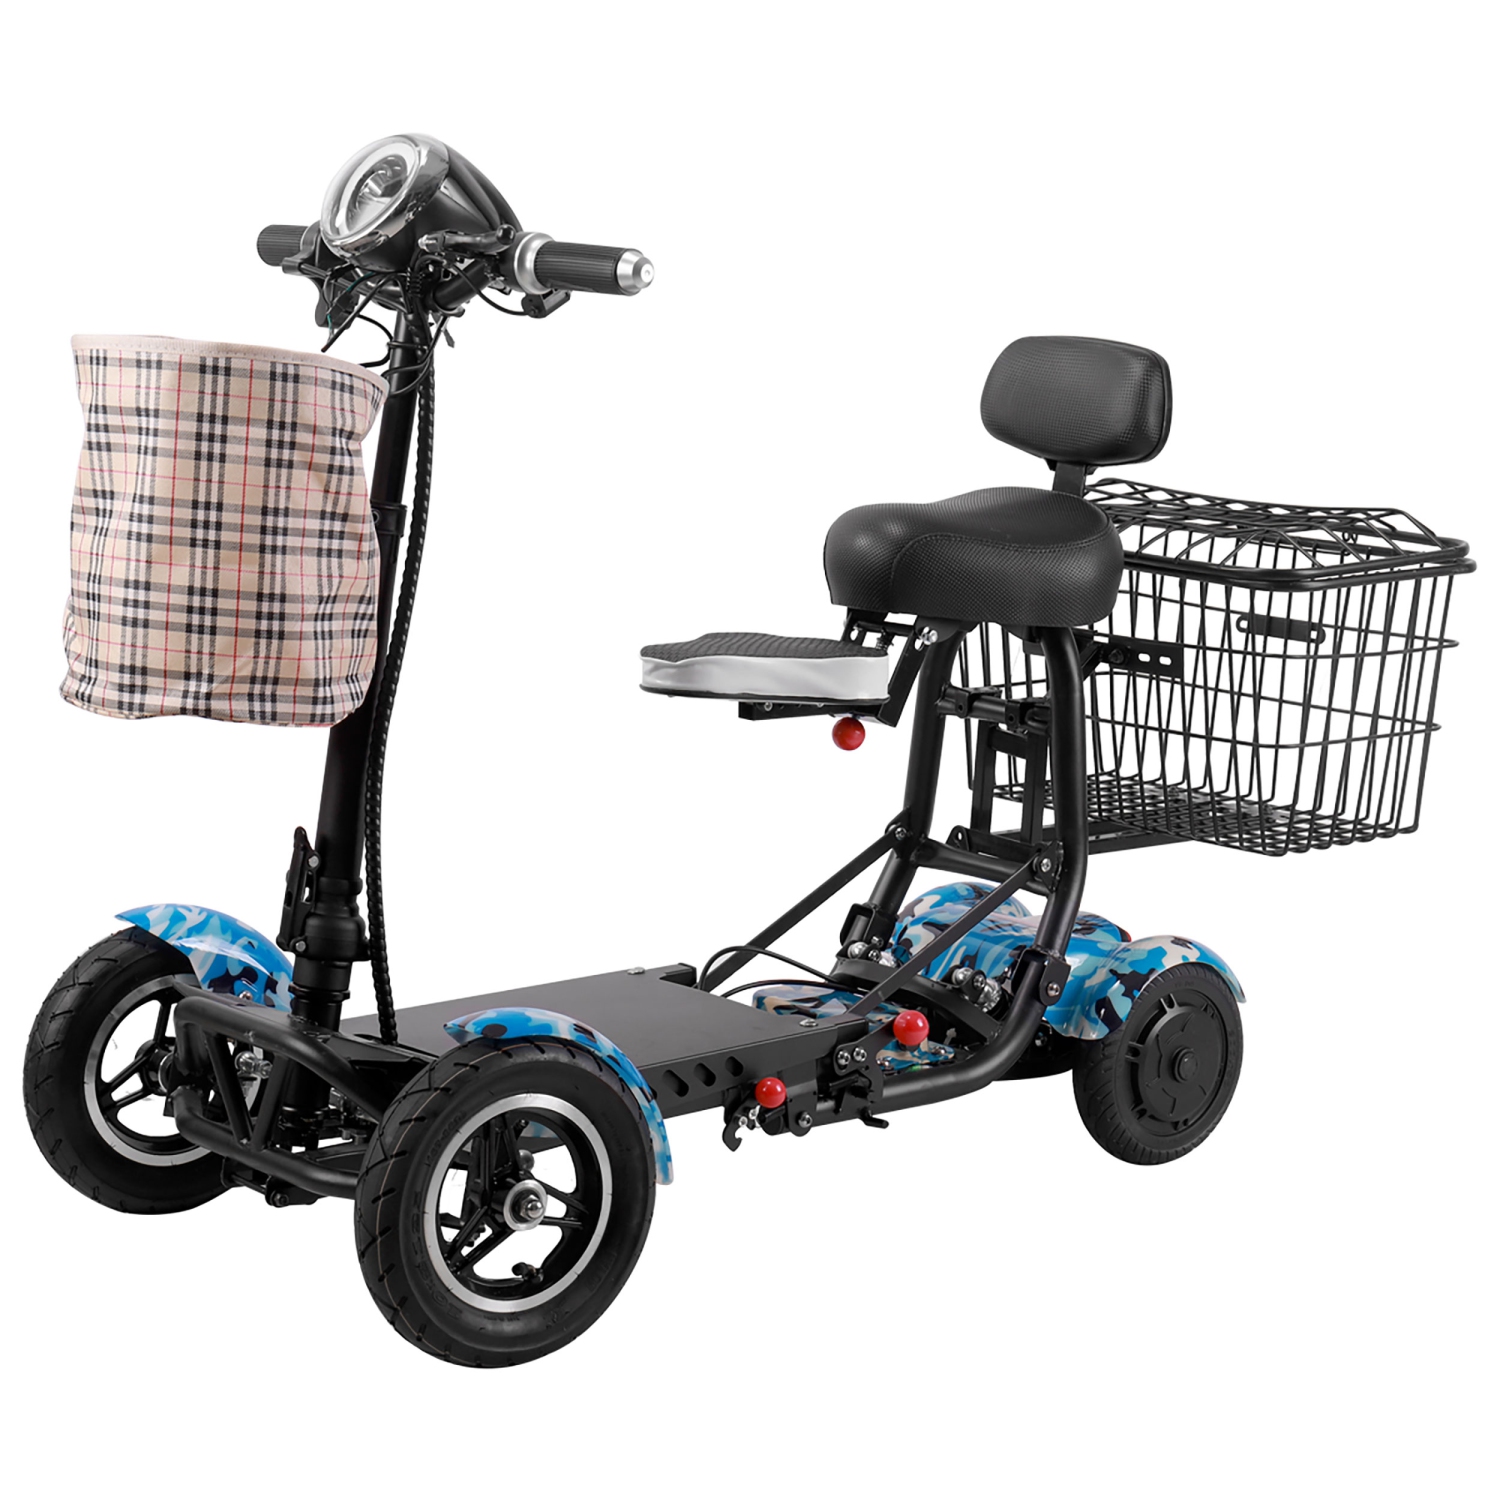 Lightweight Portable Power Scooter for Seniors and Adults, All Surfaces Long Range Up to 12 Miles / 20 km - Blue Camouflage Color